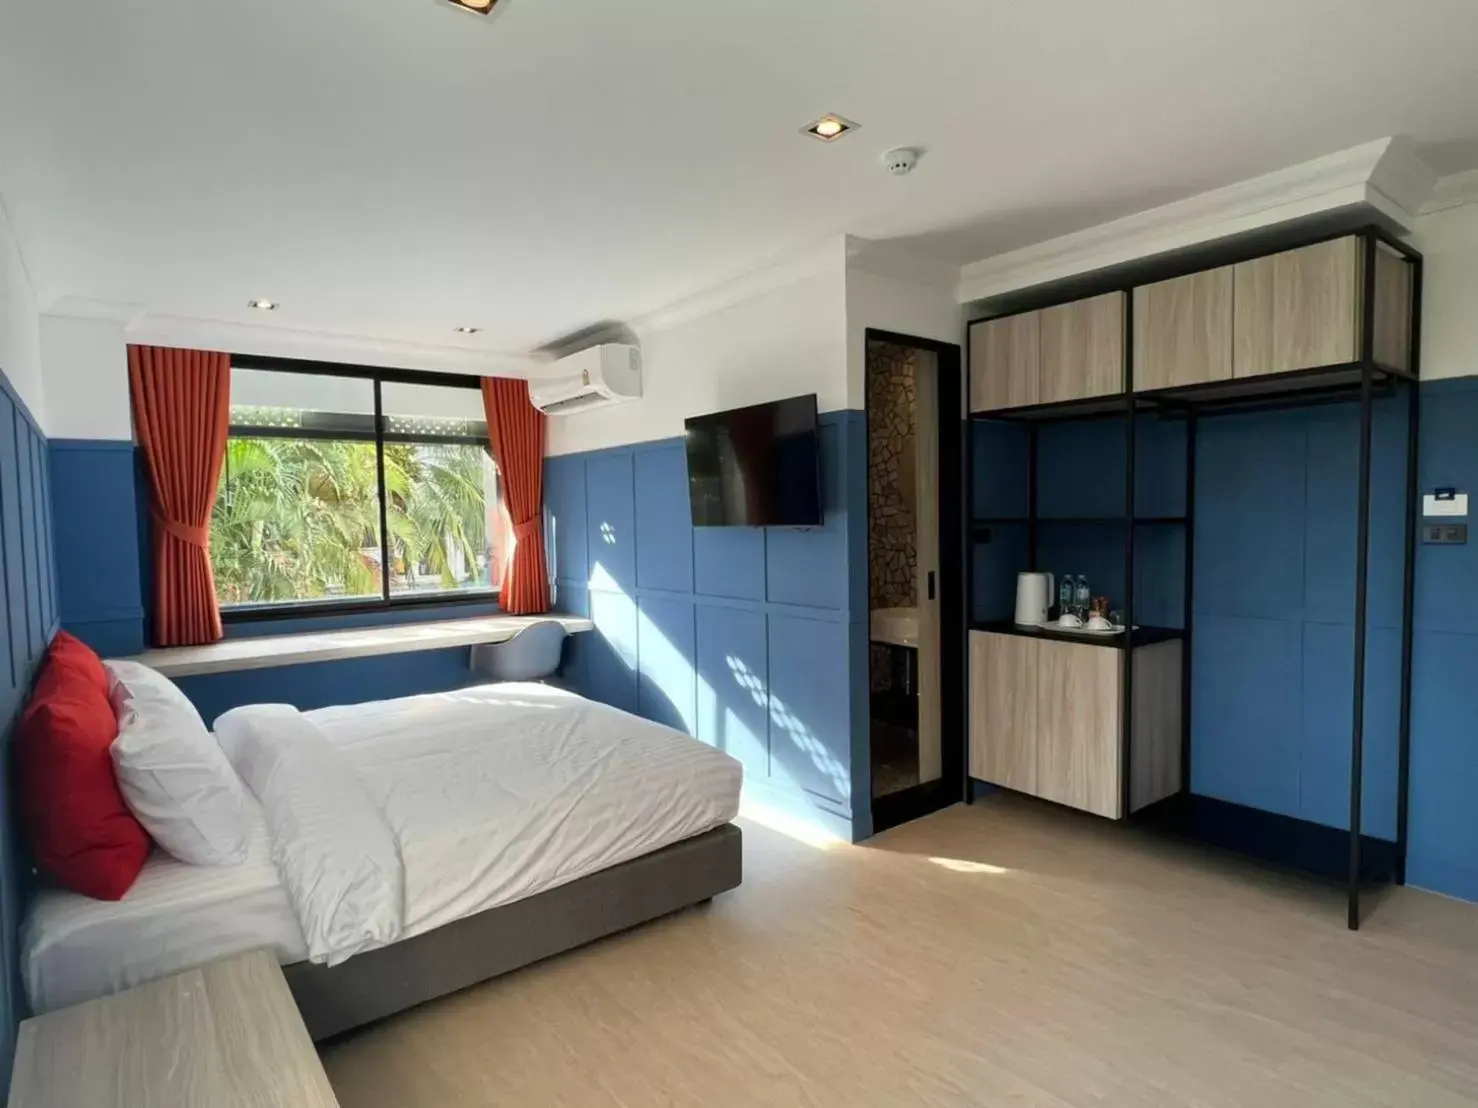 Bedroom in Penpark Place